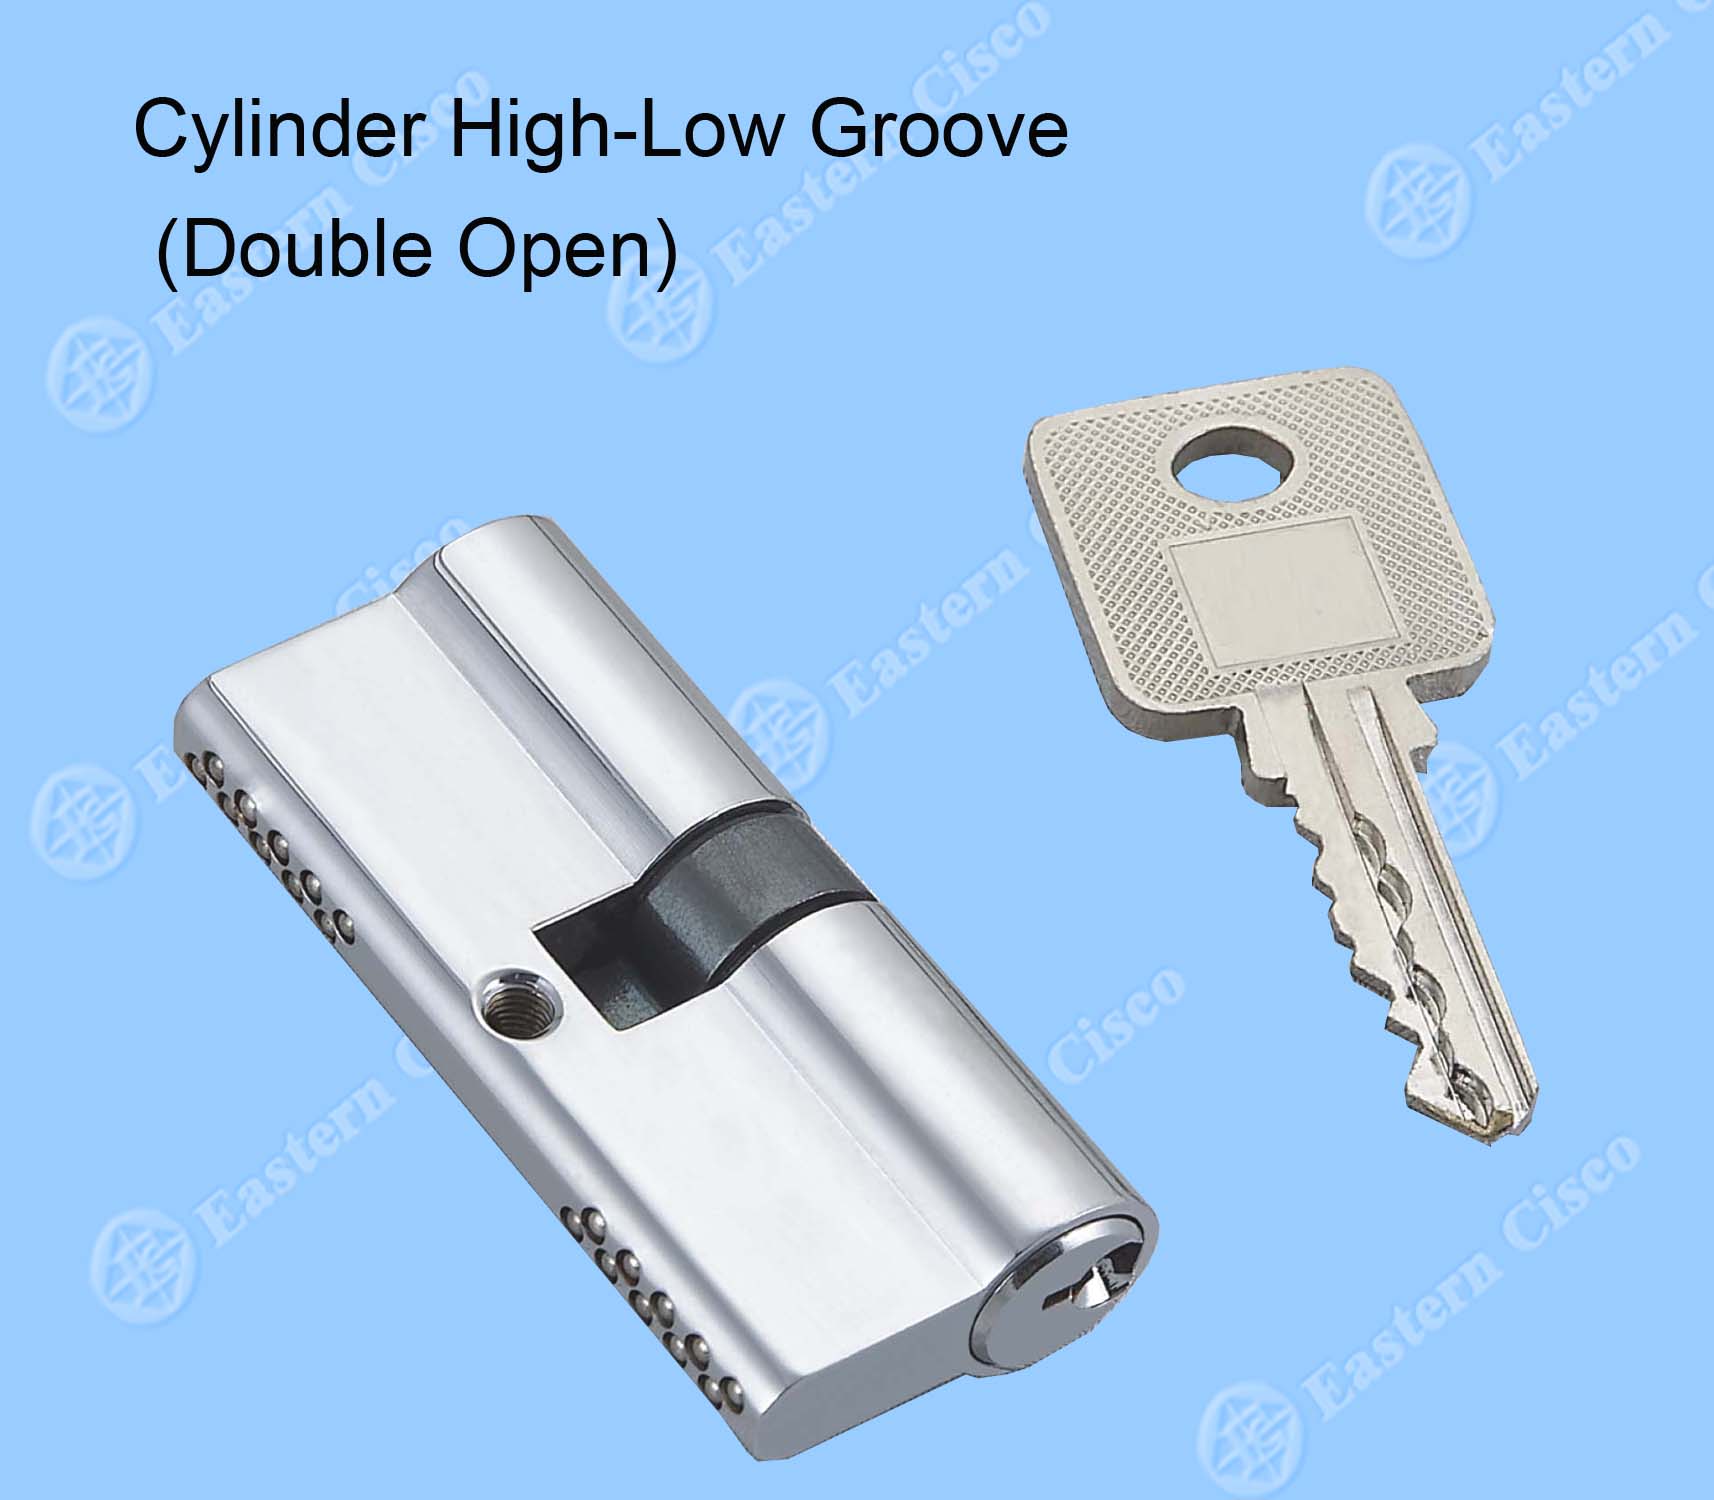 Cylinder High-Low Groove 